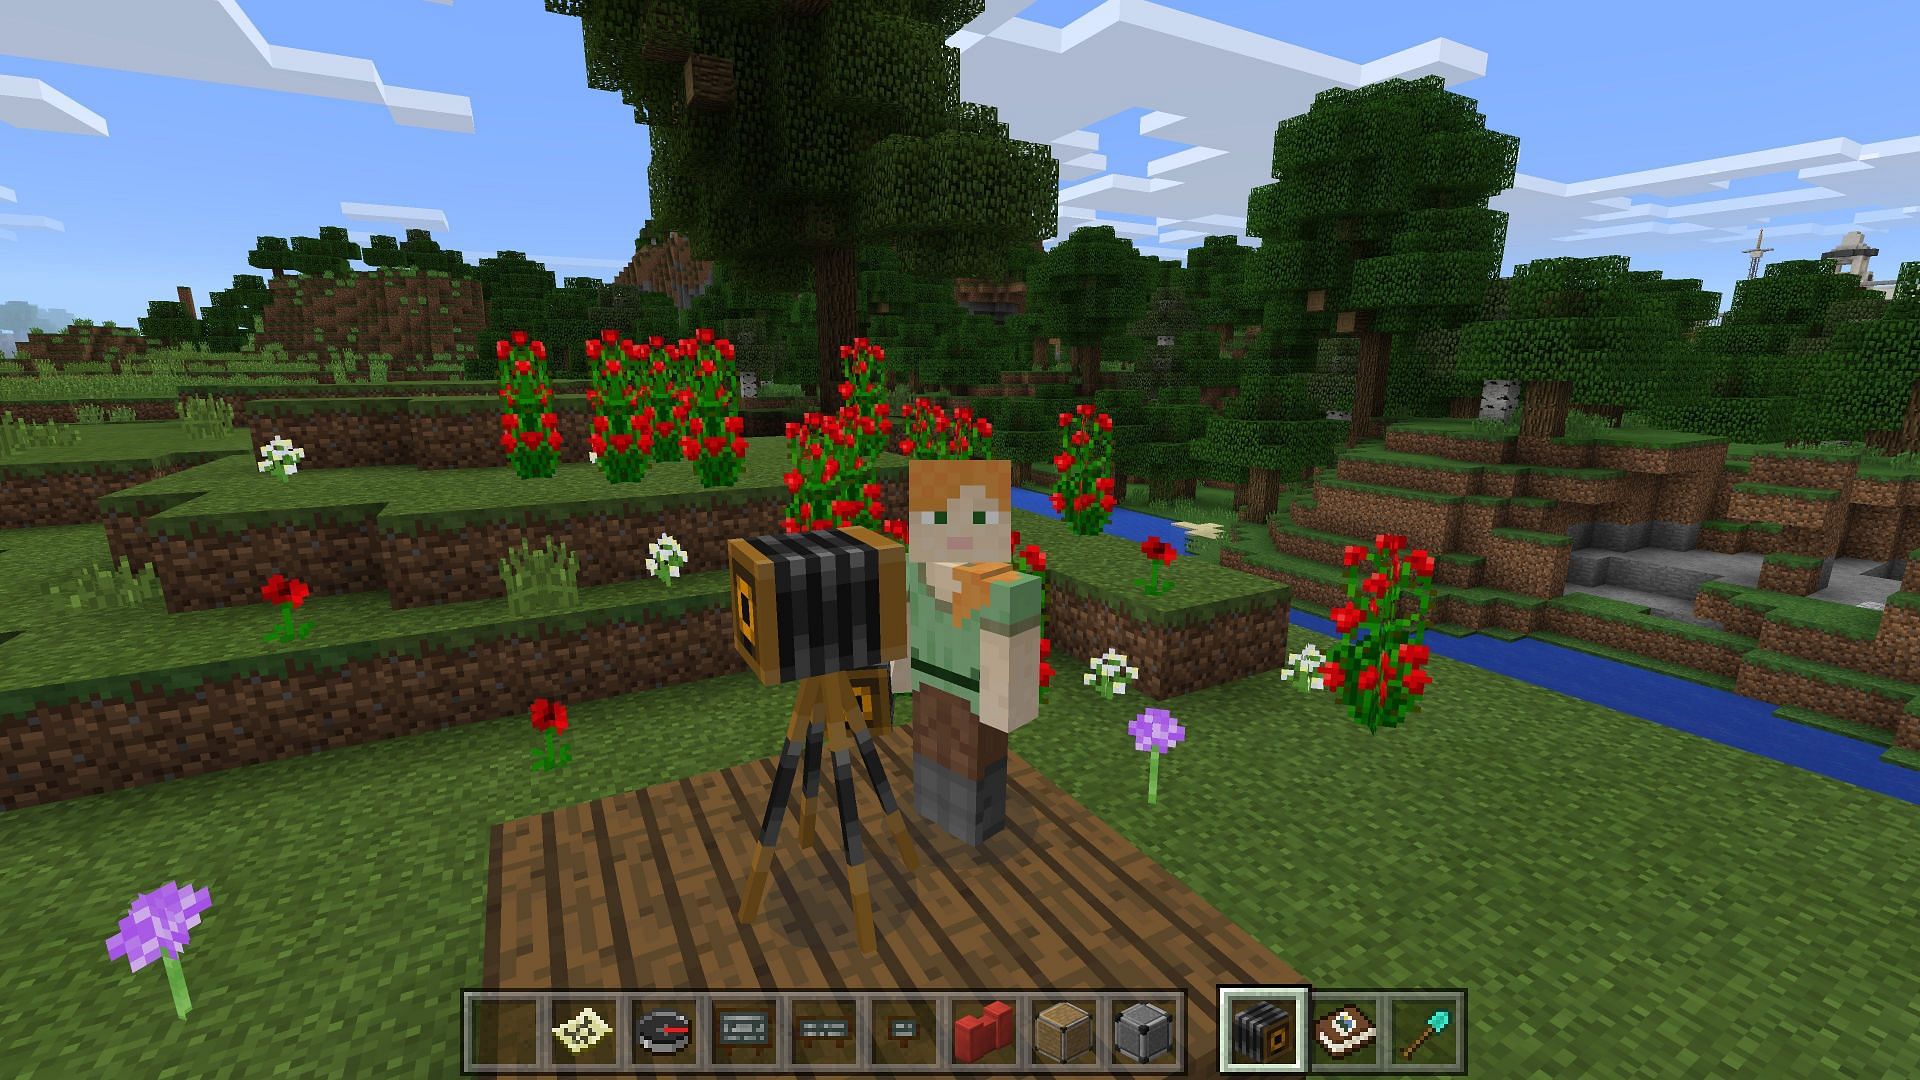 The camera can be used in Minecraft: Education Edition to create a photo portfolio (Image via Mojang).